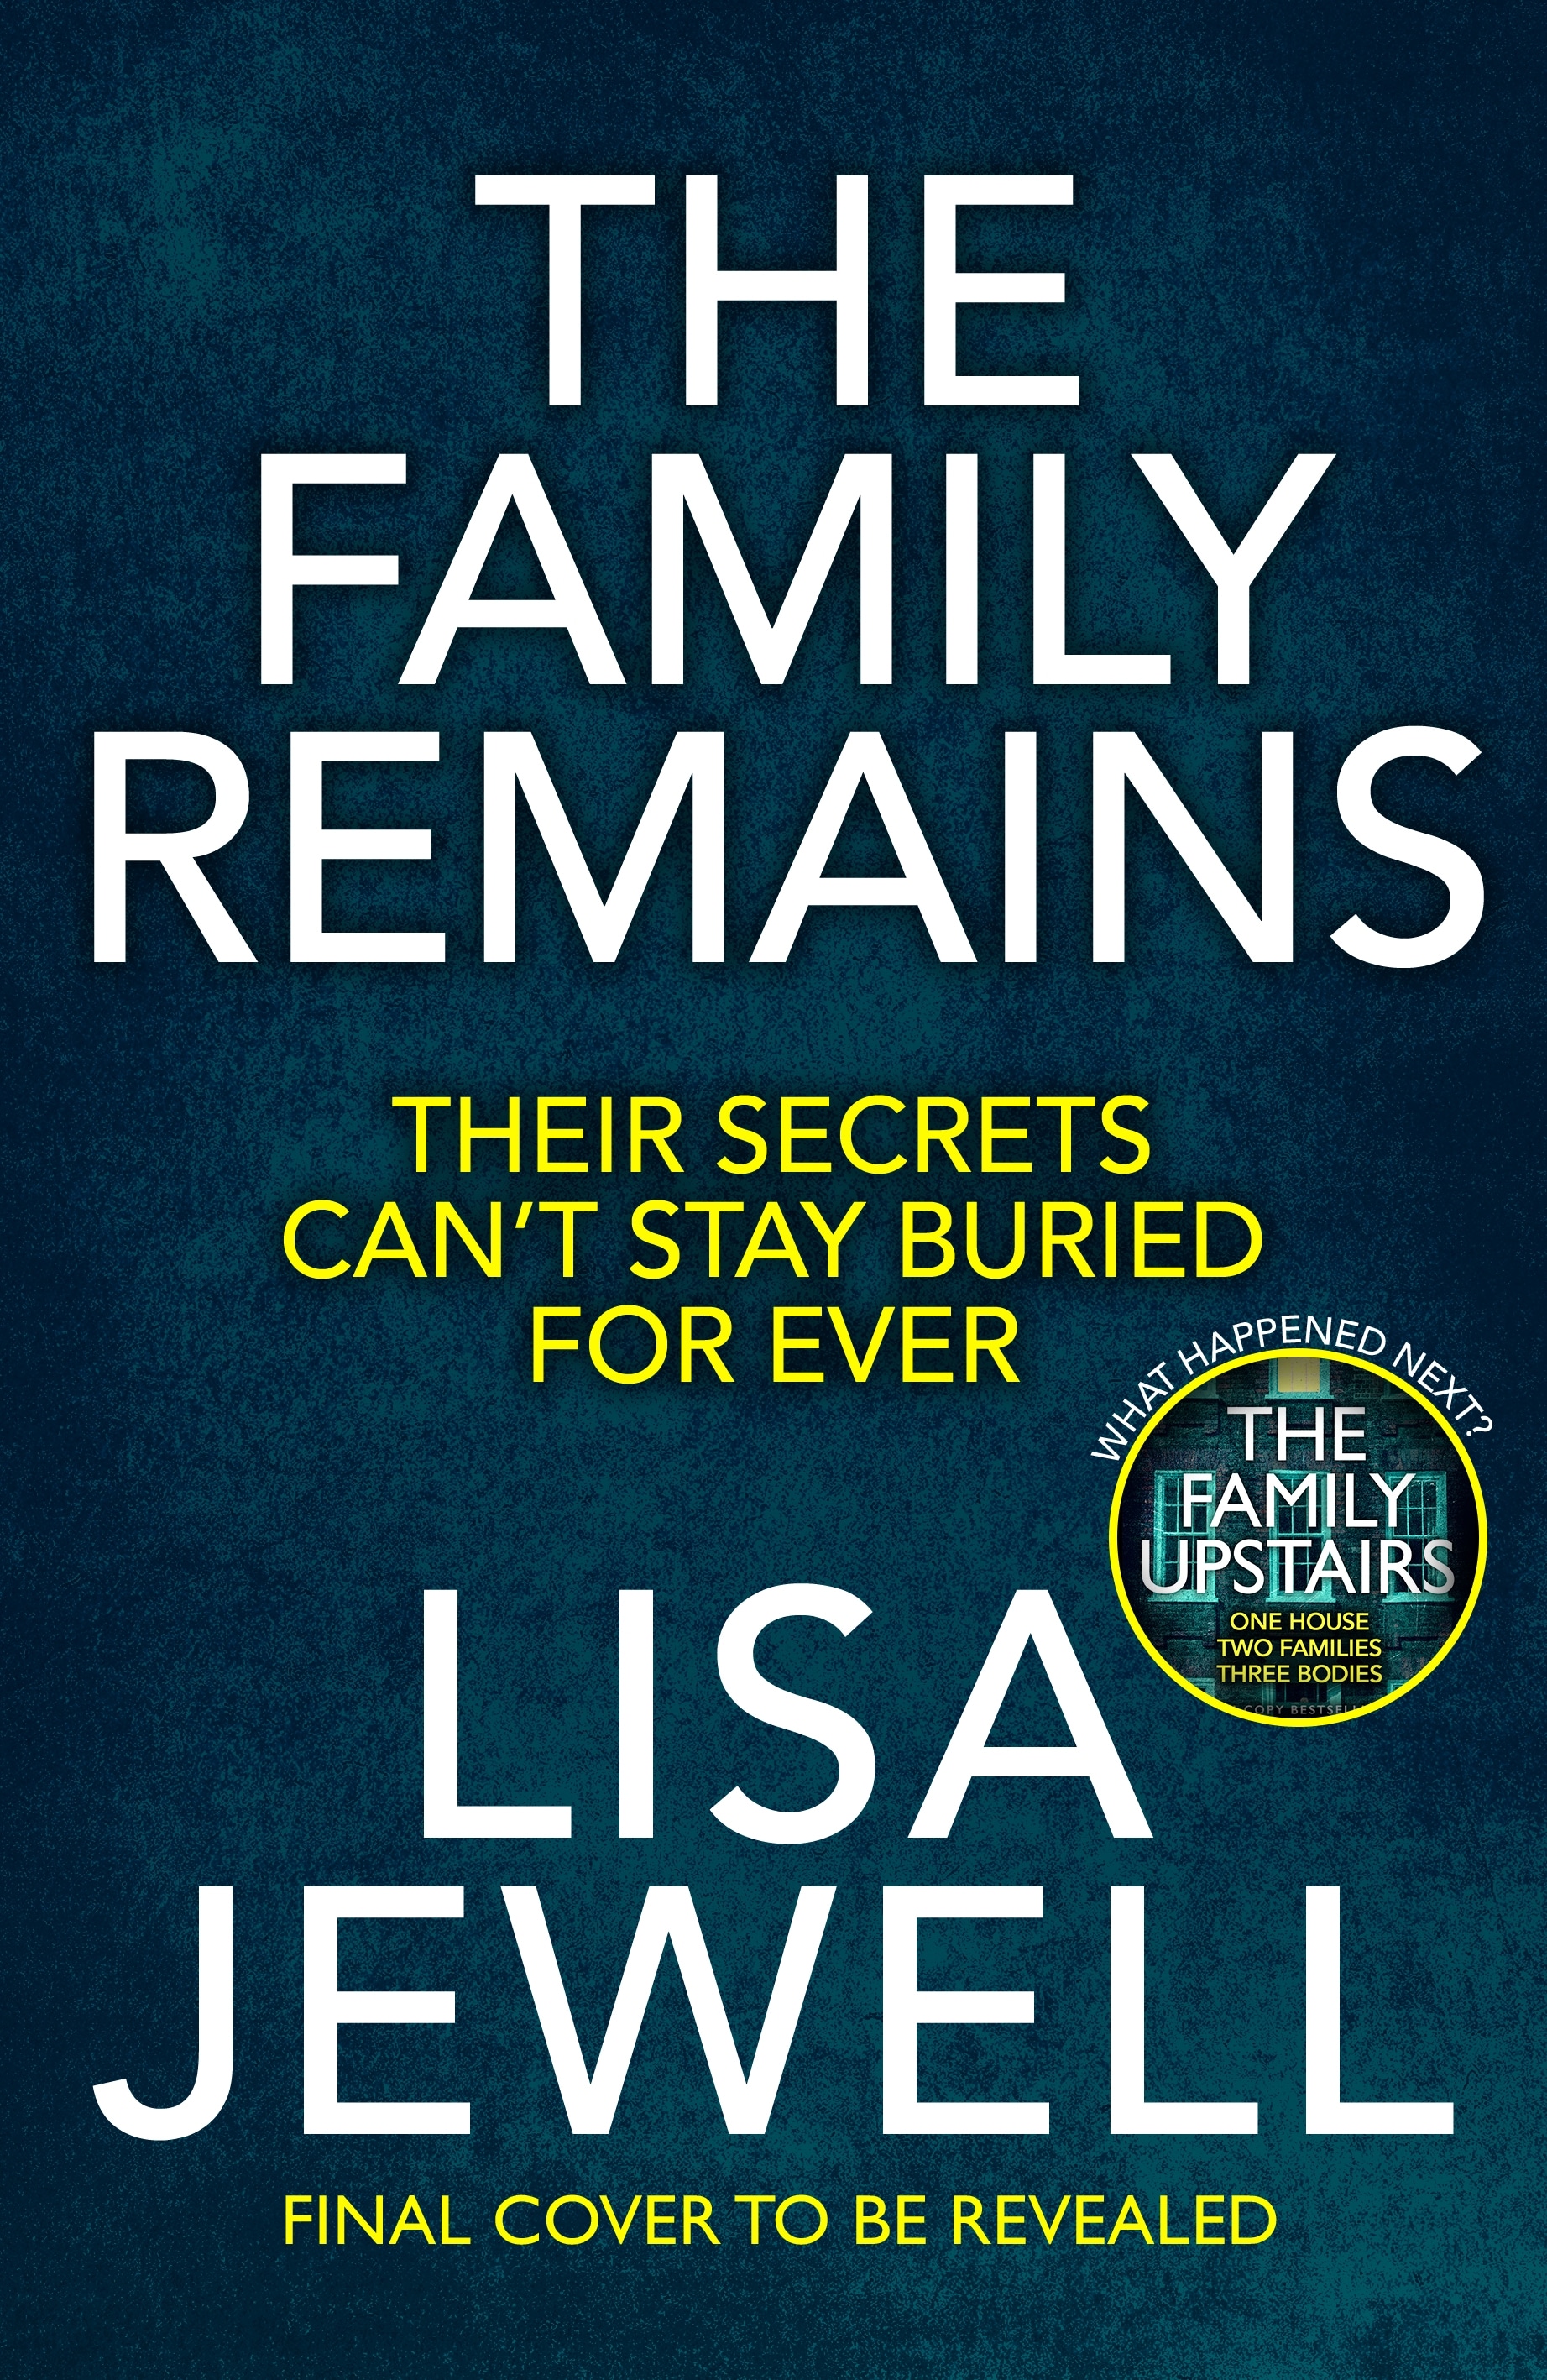 Book “The Family Remains” by Lisa Jewell — July 21, 2022